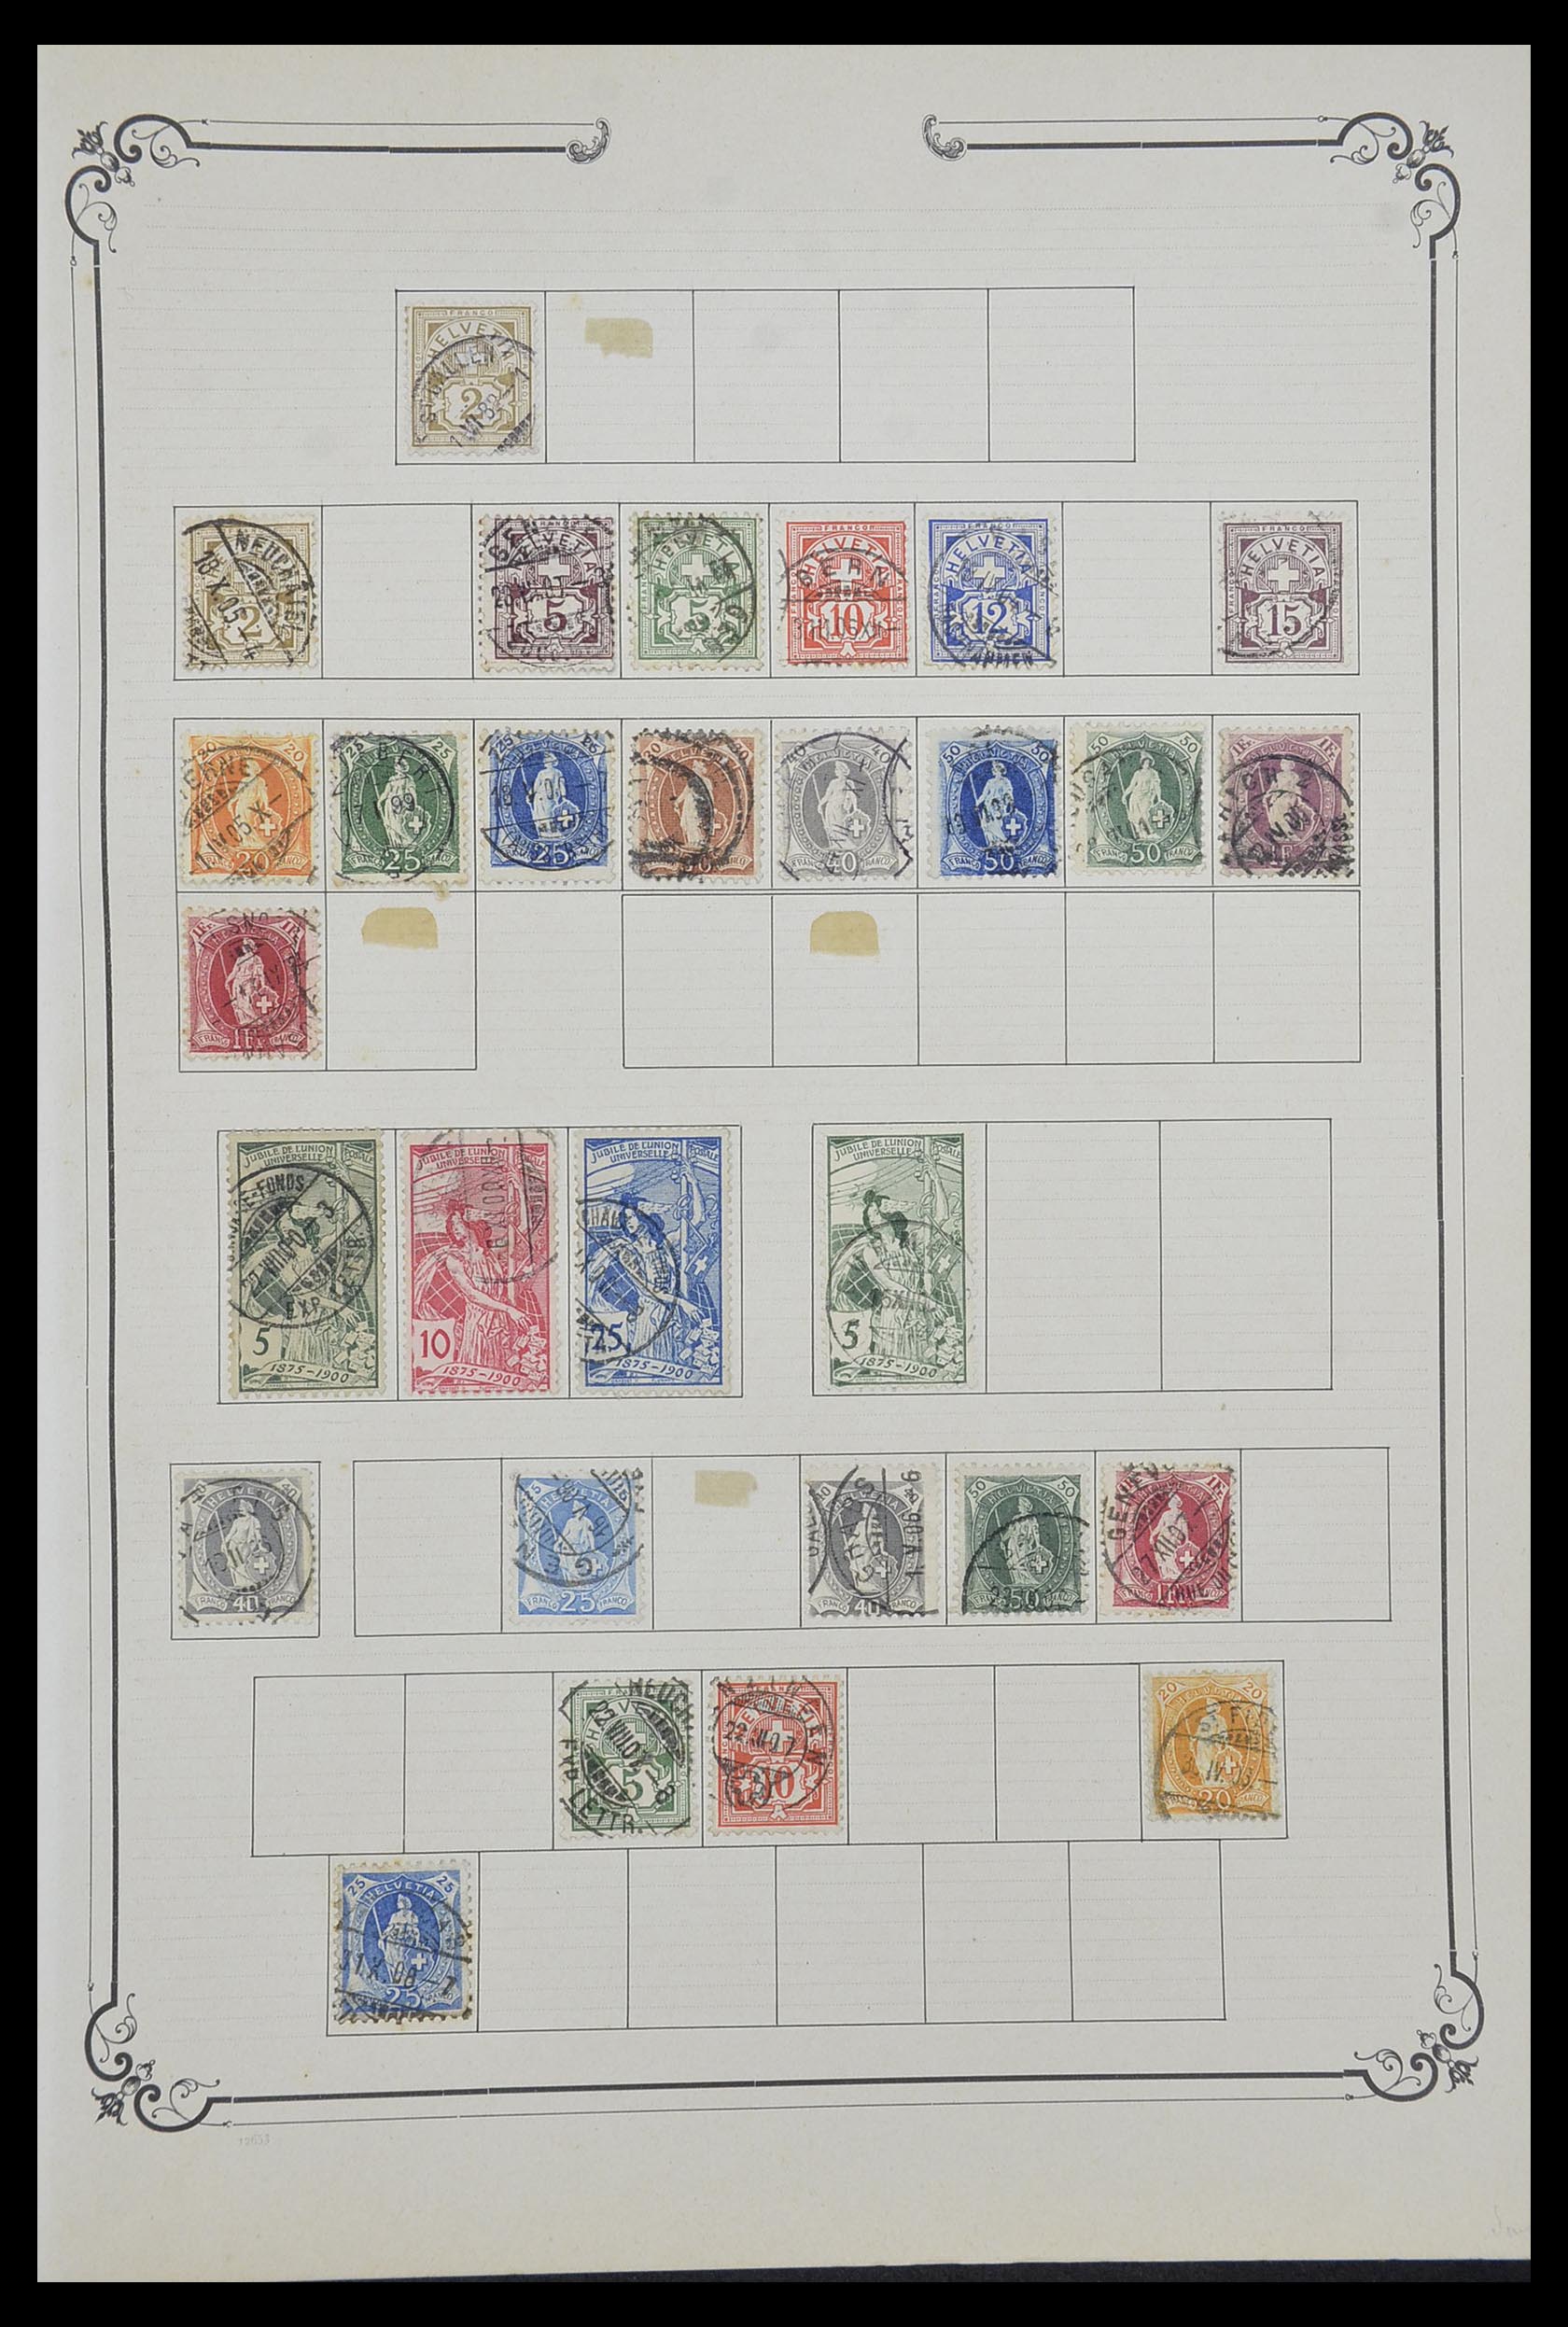 33991 036 - Stamp collection 33991 European countries 1851-ca. 1920.